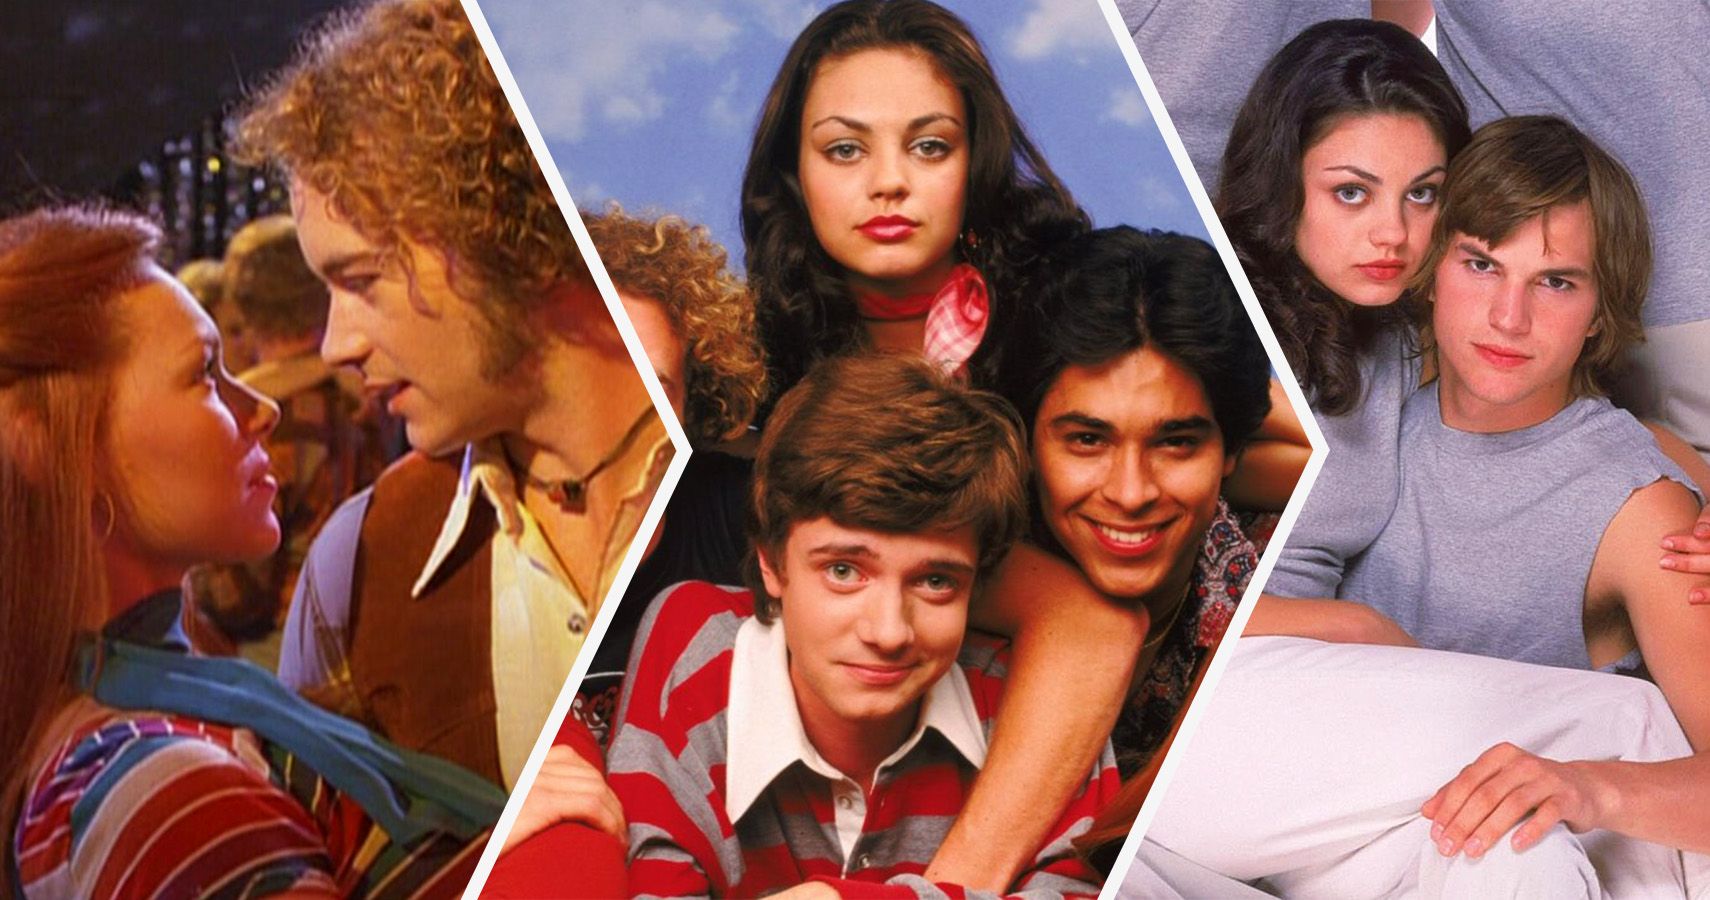 15 Things That Make No Sense About That '70s Show | ScreenRant